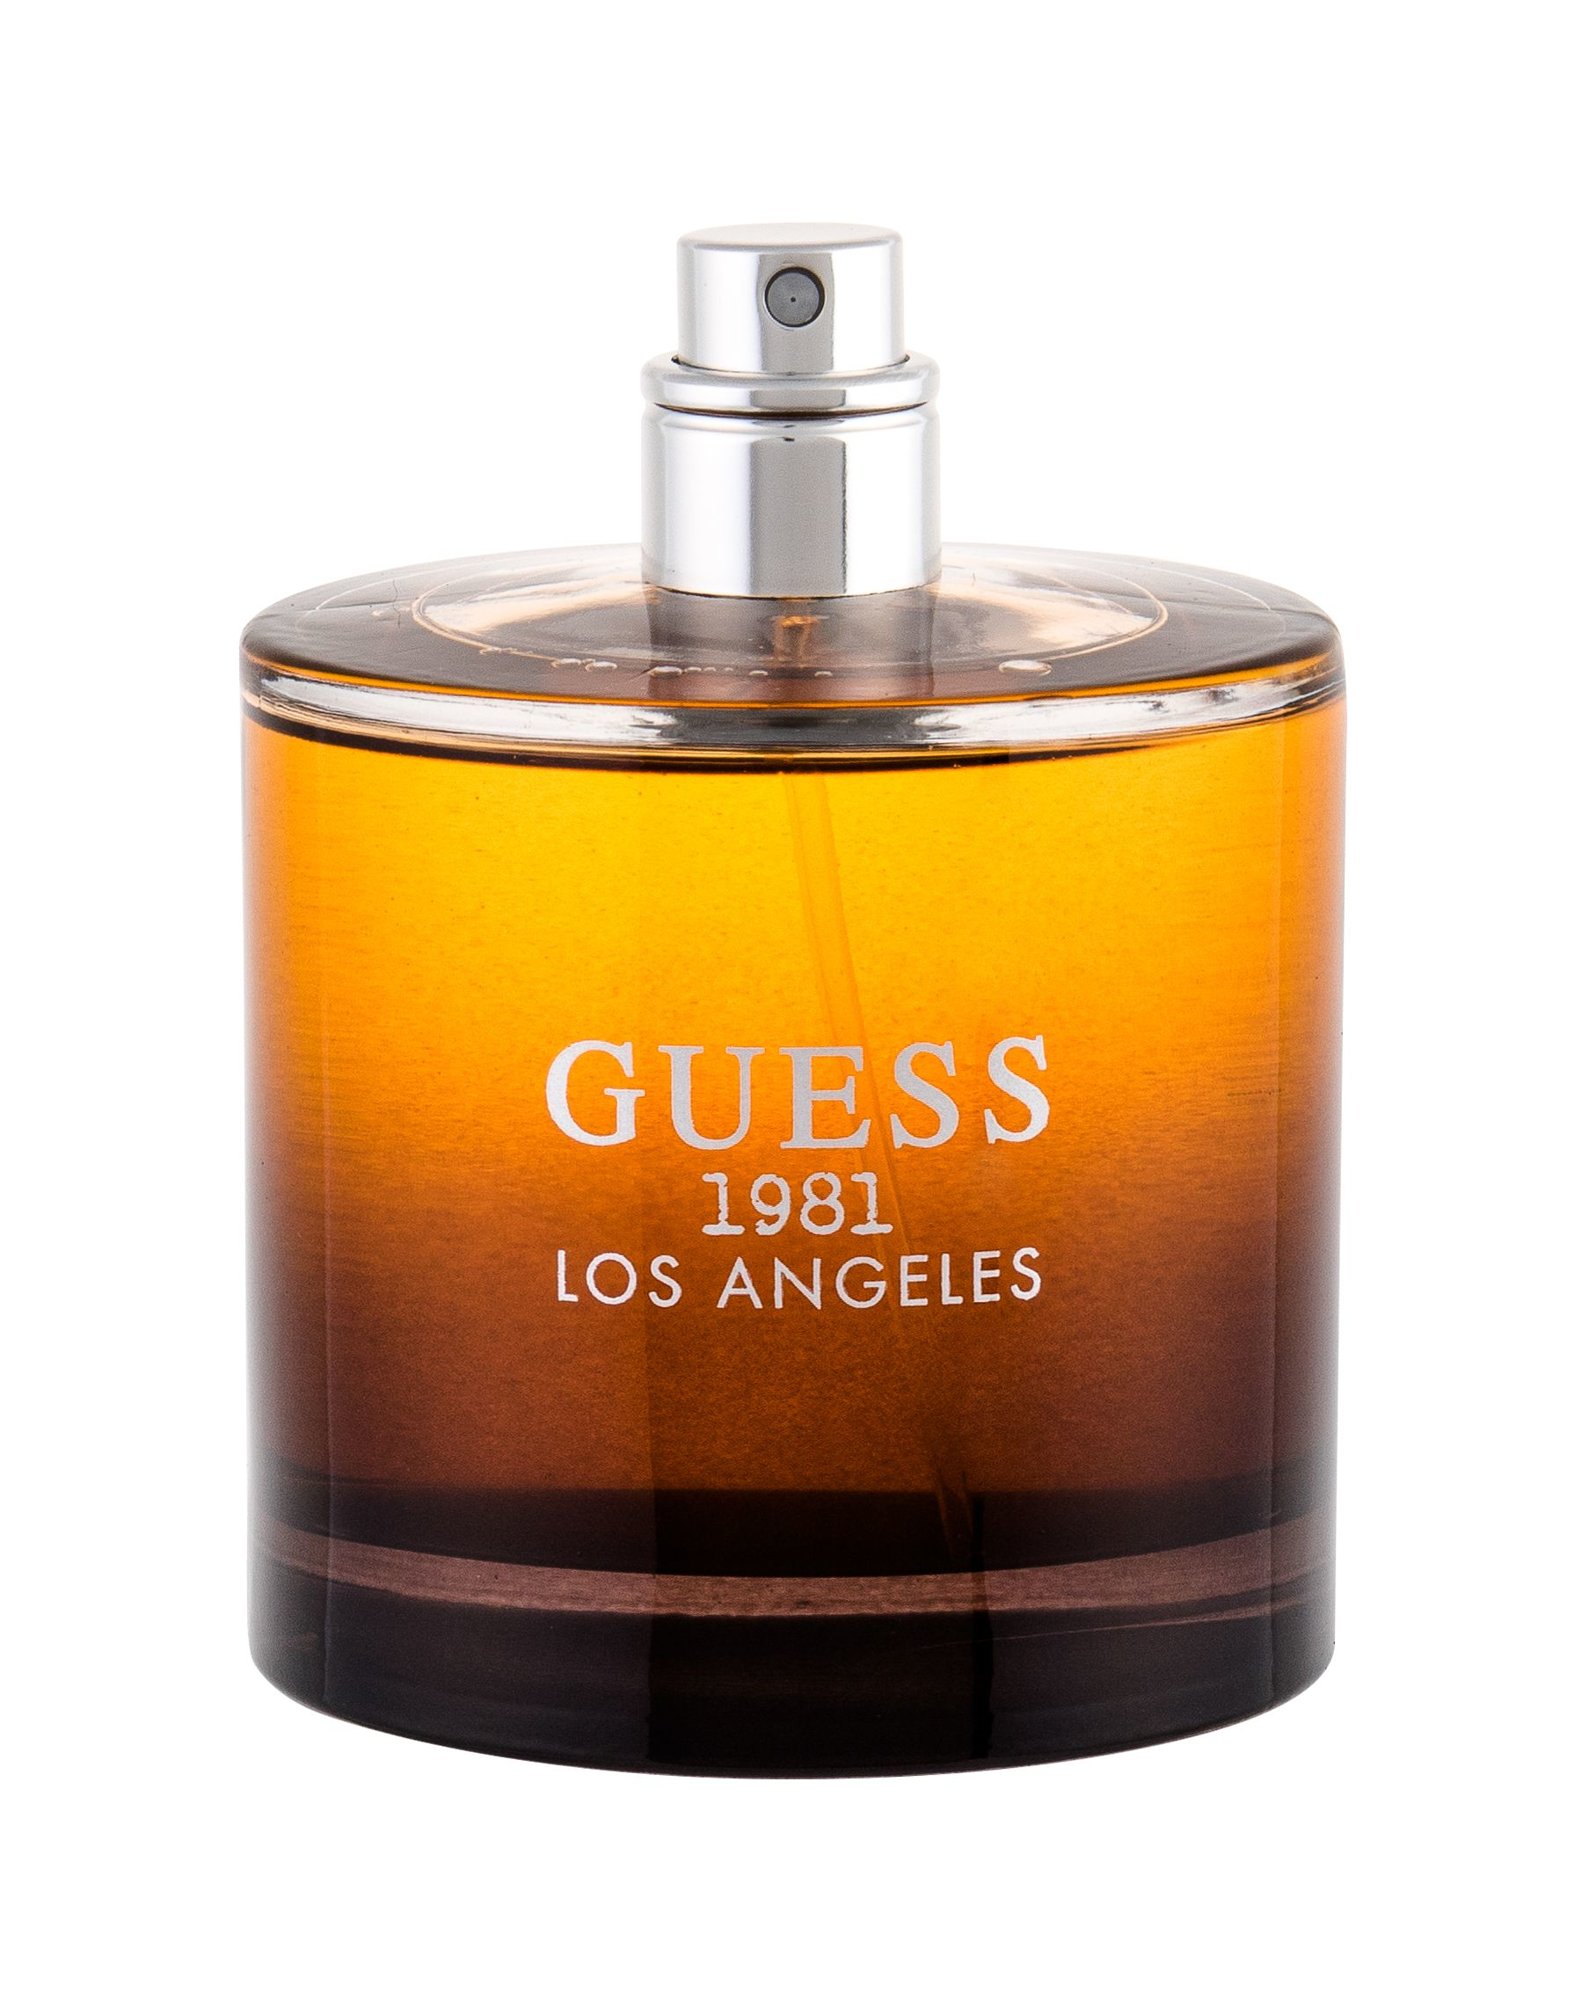 GUESS Guess 1981